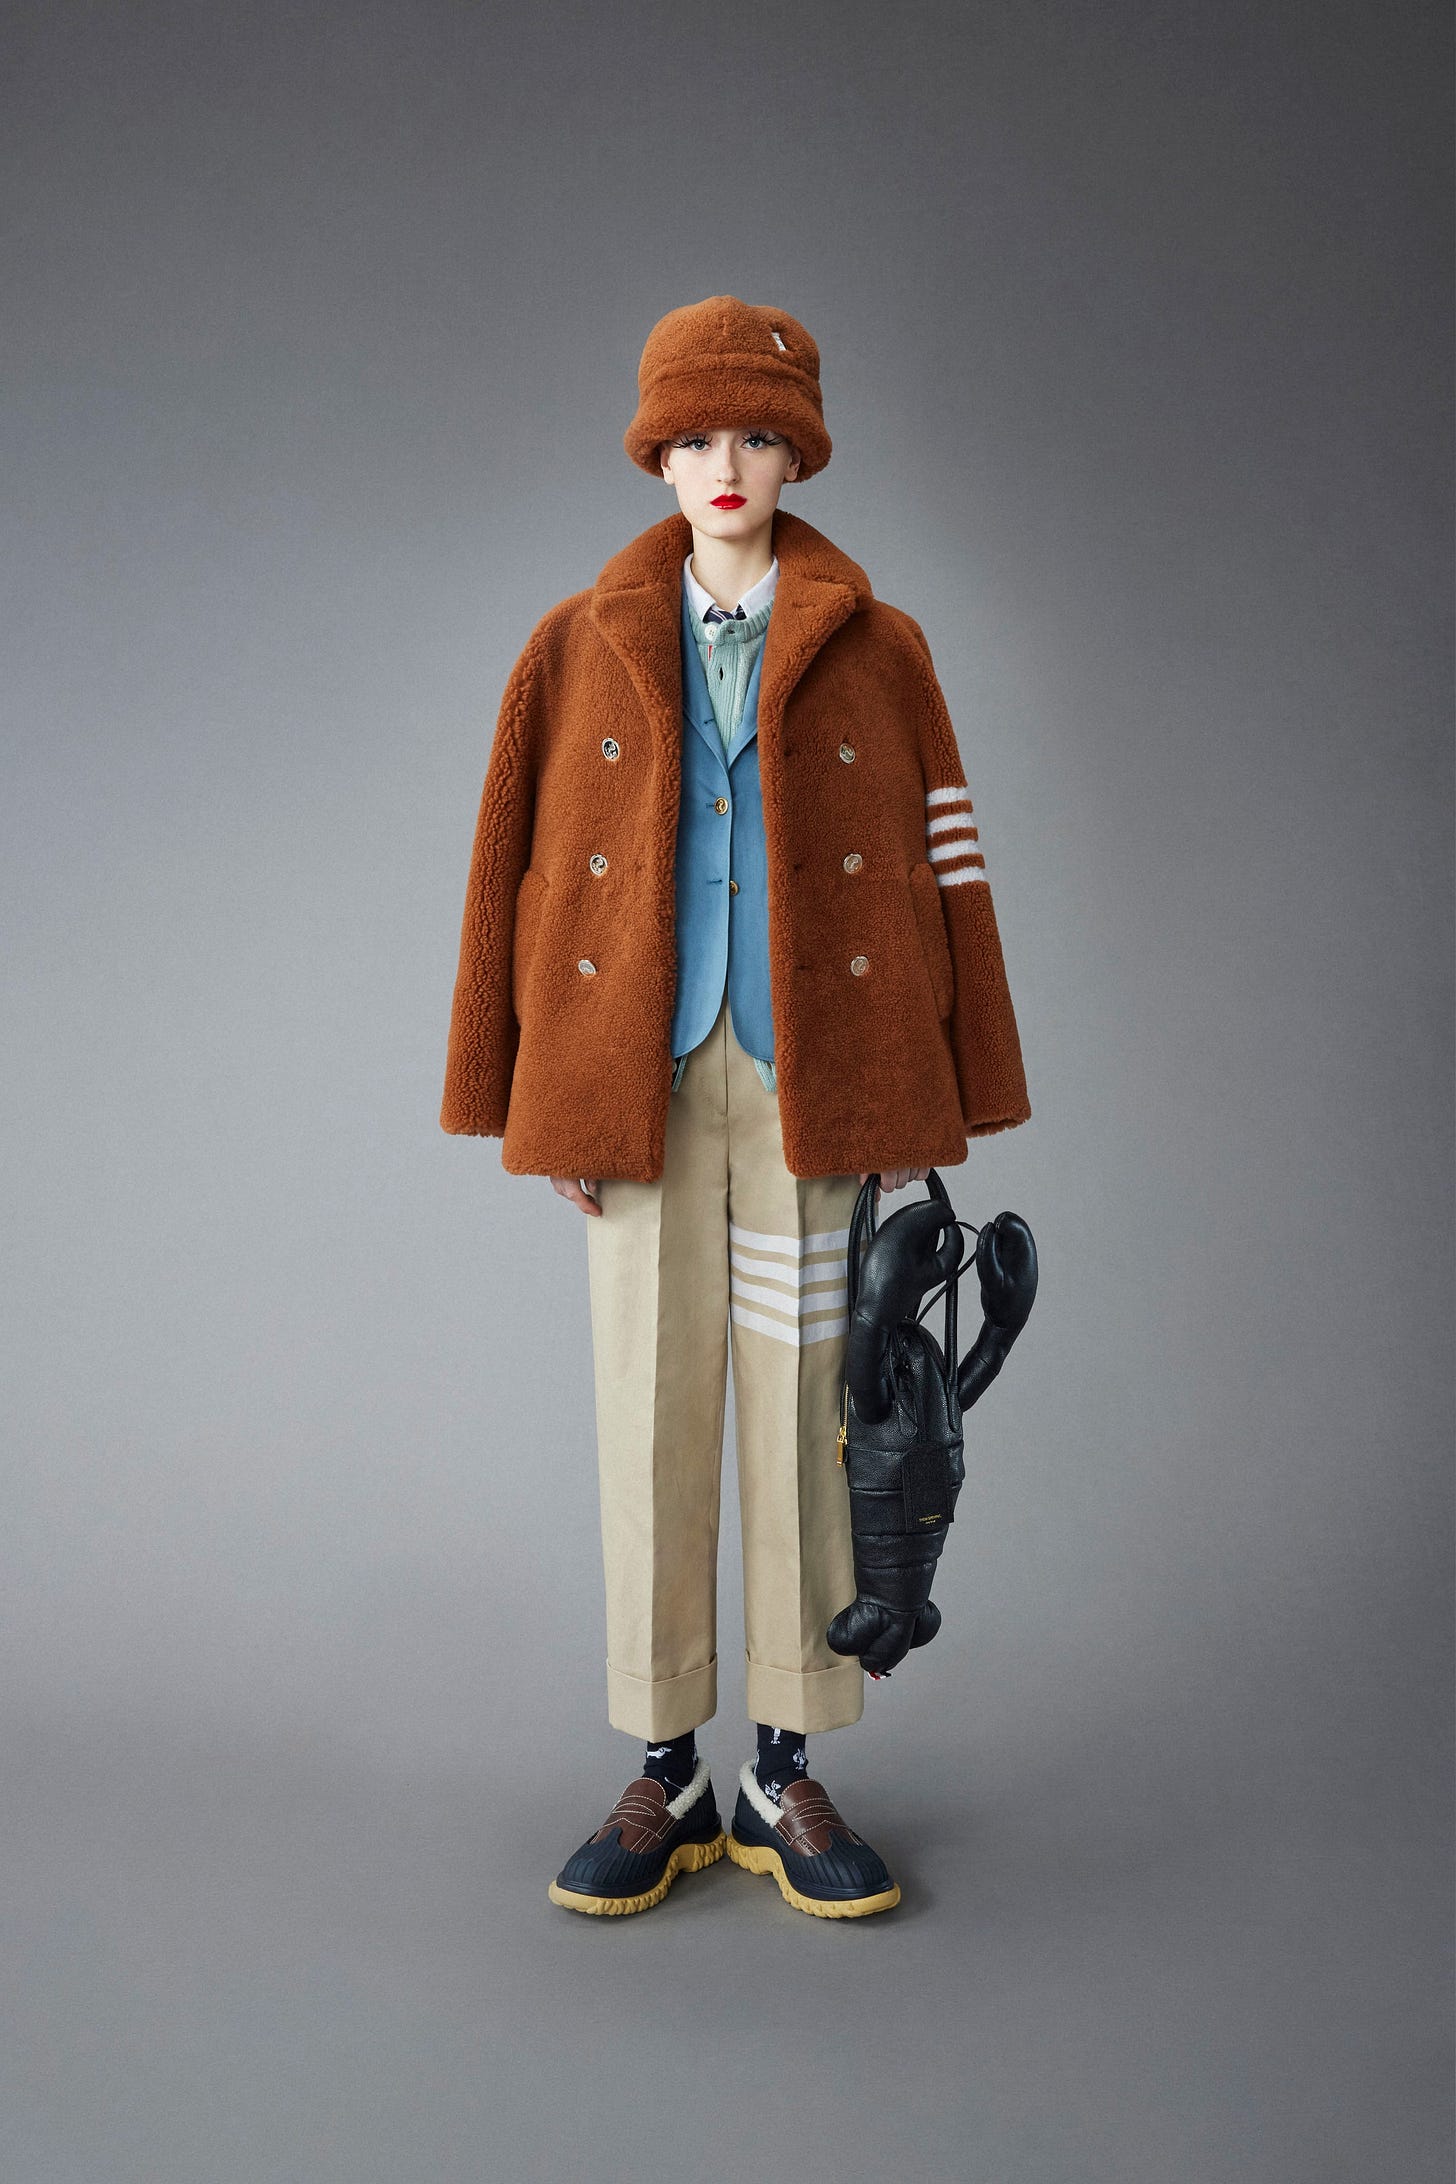 Image may contain Coat Clothing Apparel Human Person Doll Toy and Overcoat